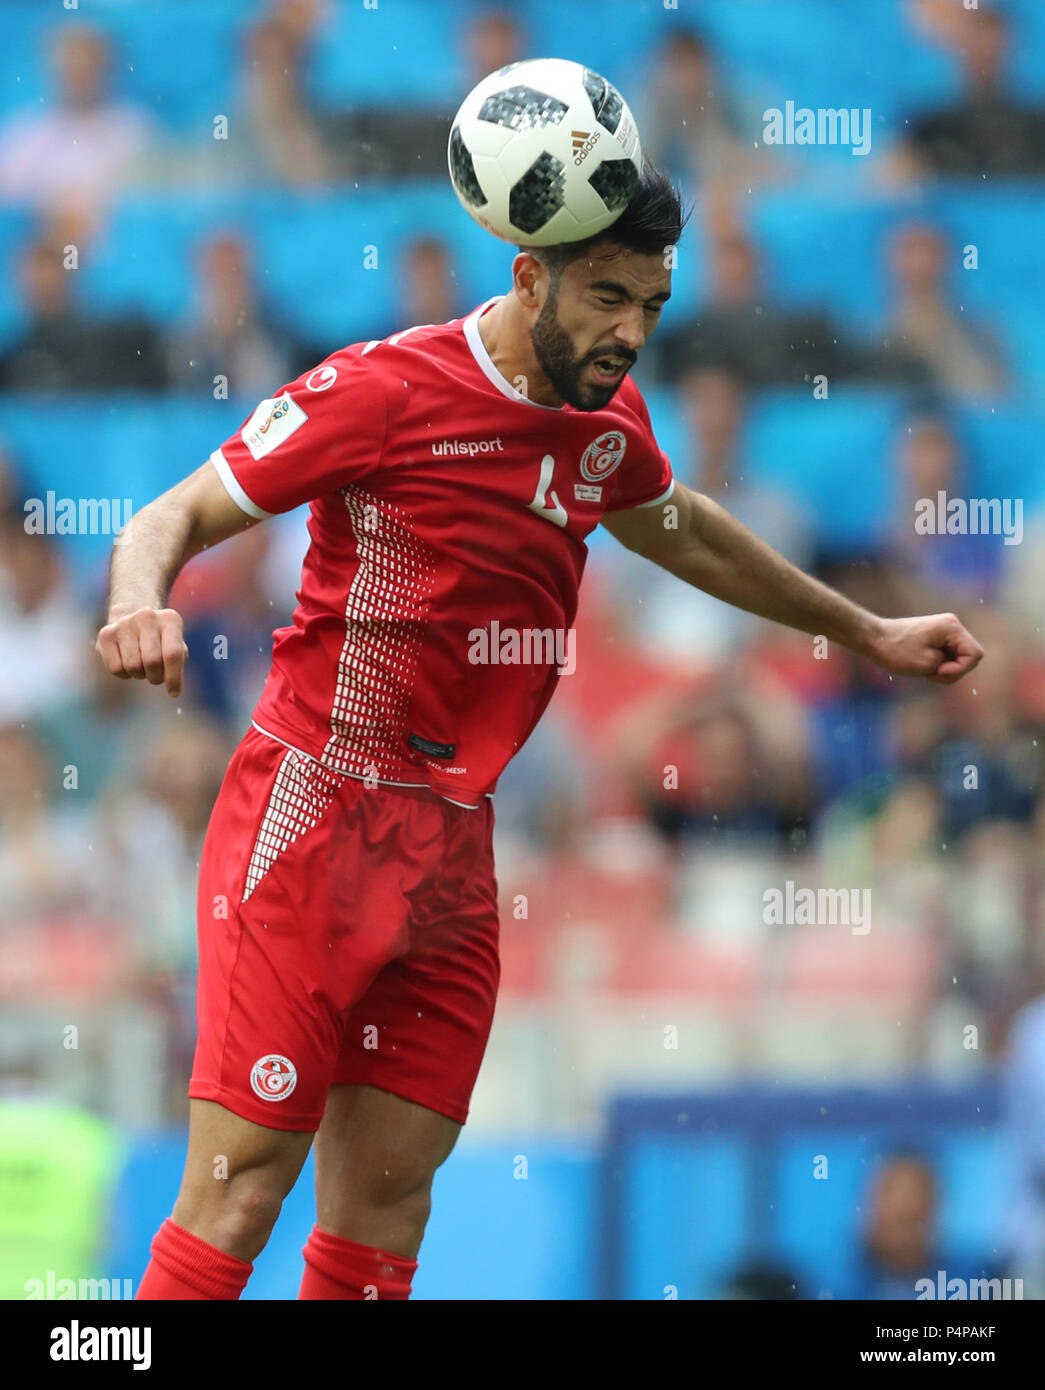 Moscow, Russia. 23rd June, 2018. Yassine Meriah of Tunisia competes for a header during the 2018 FIFA World Cup Group G match between Belgium and Tunisia in Moscow, Russia, June 23, 2018. Belgium won 5-2. Credit: Yang Lei/Xinhua/Alamy Live News Stock Photo